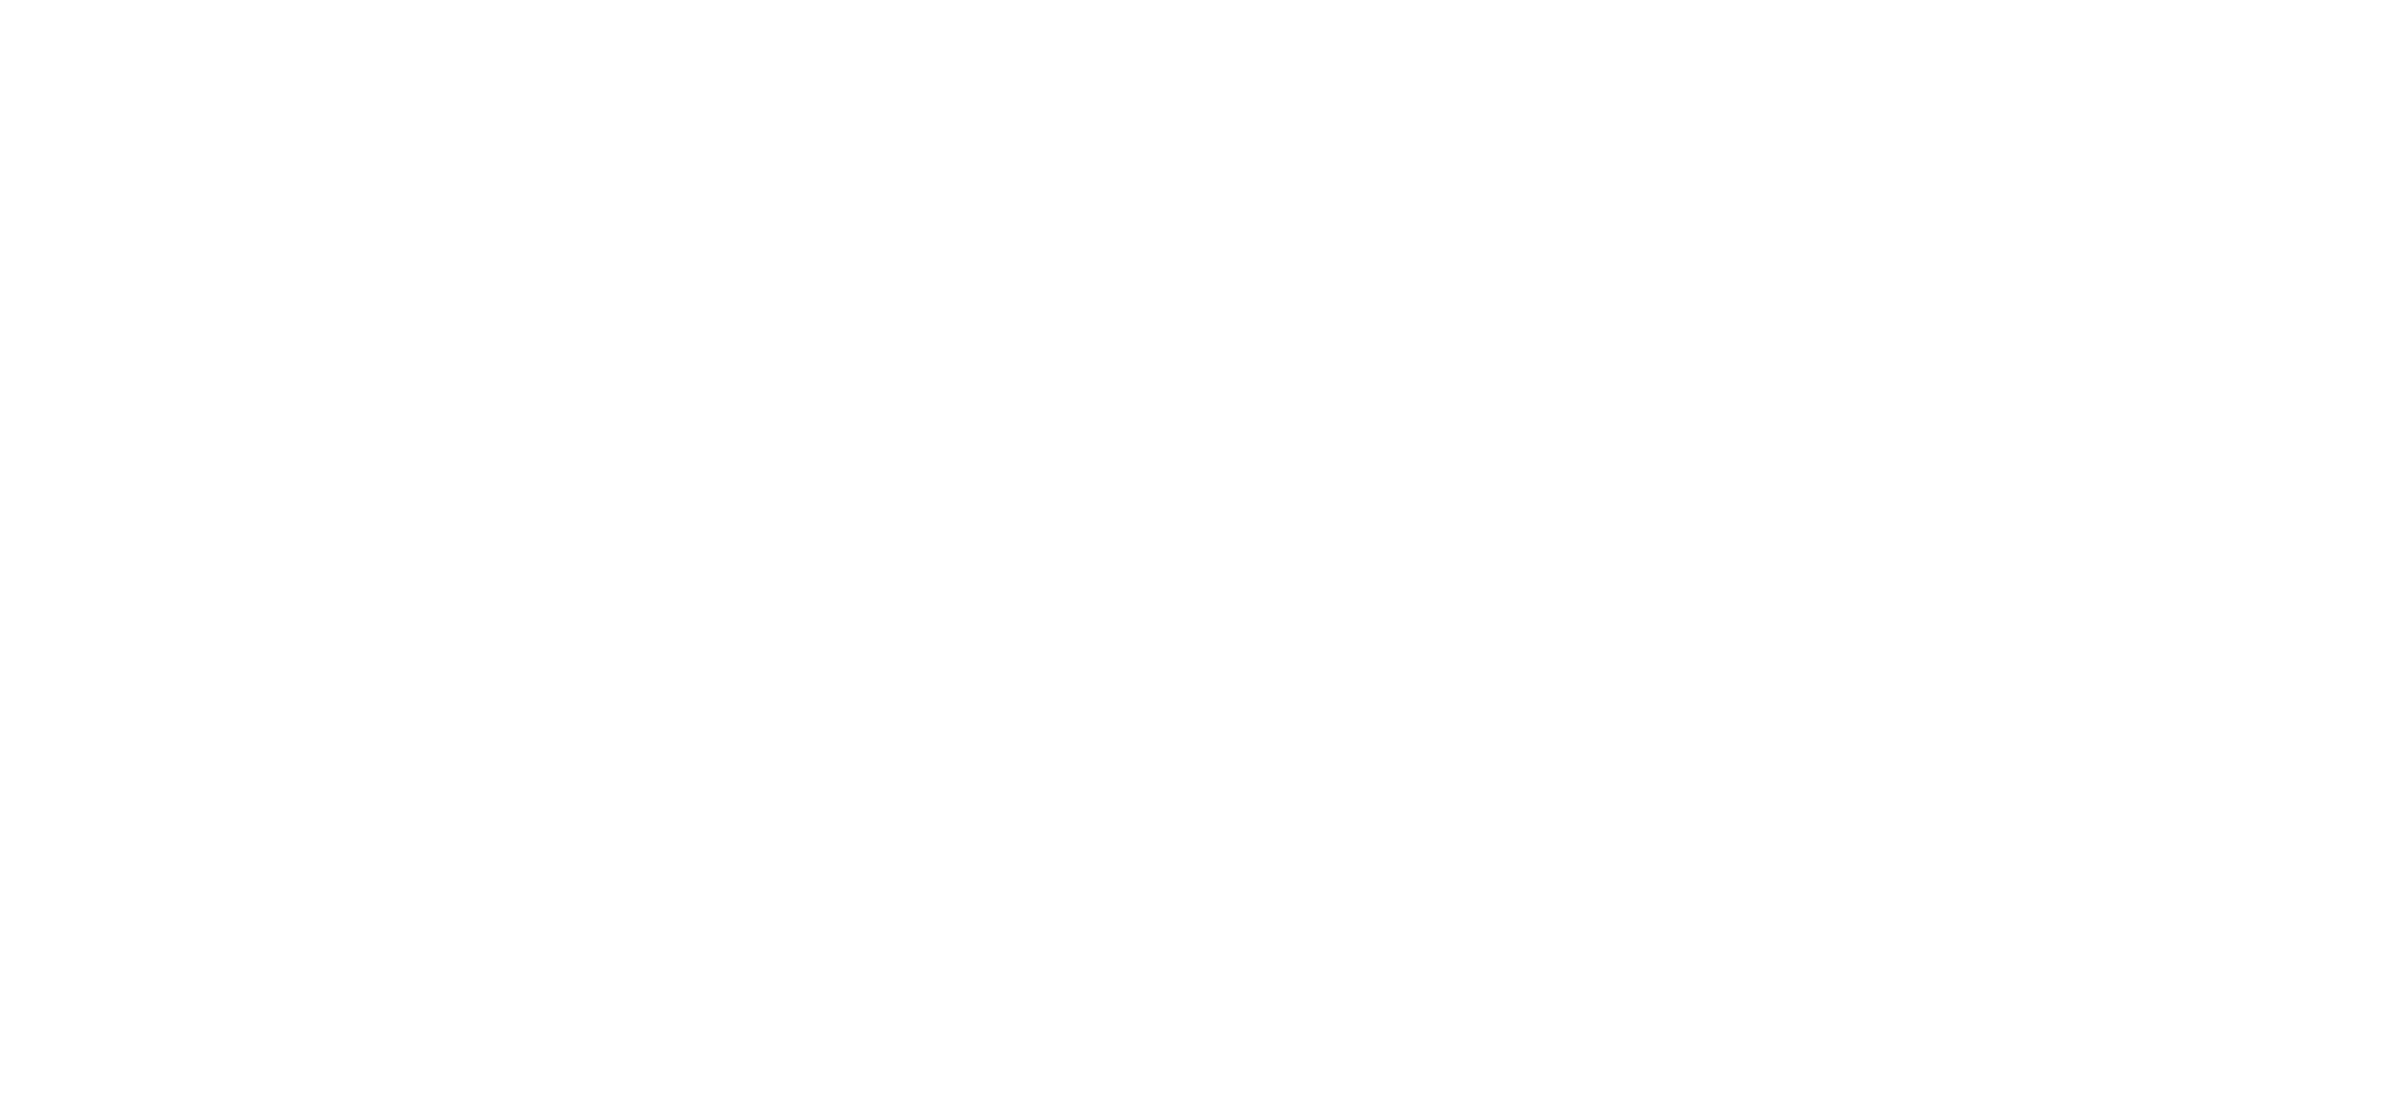 HOME COORDY 2022 Spring / Summer